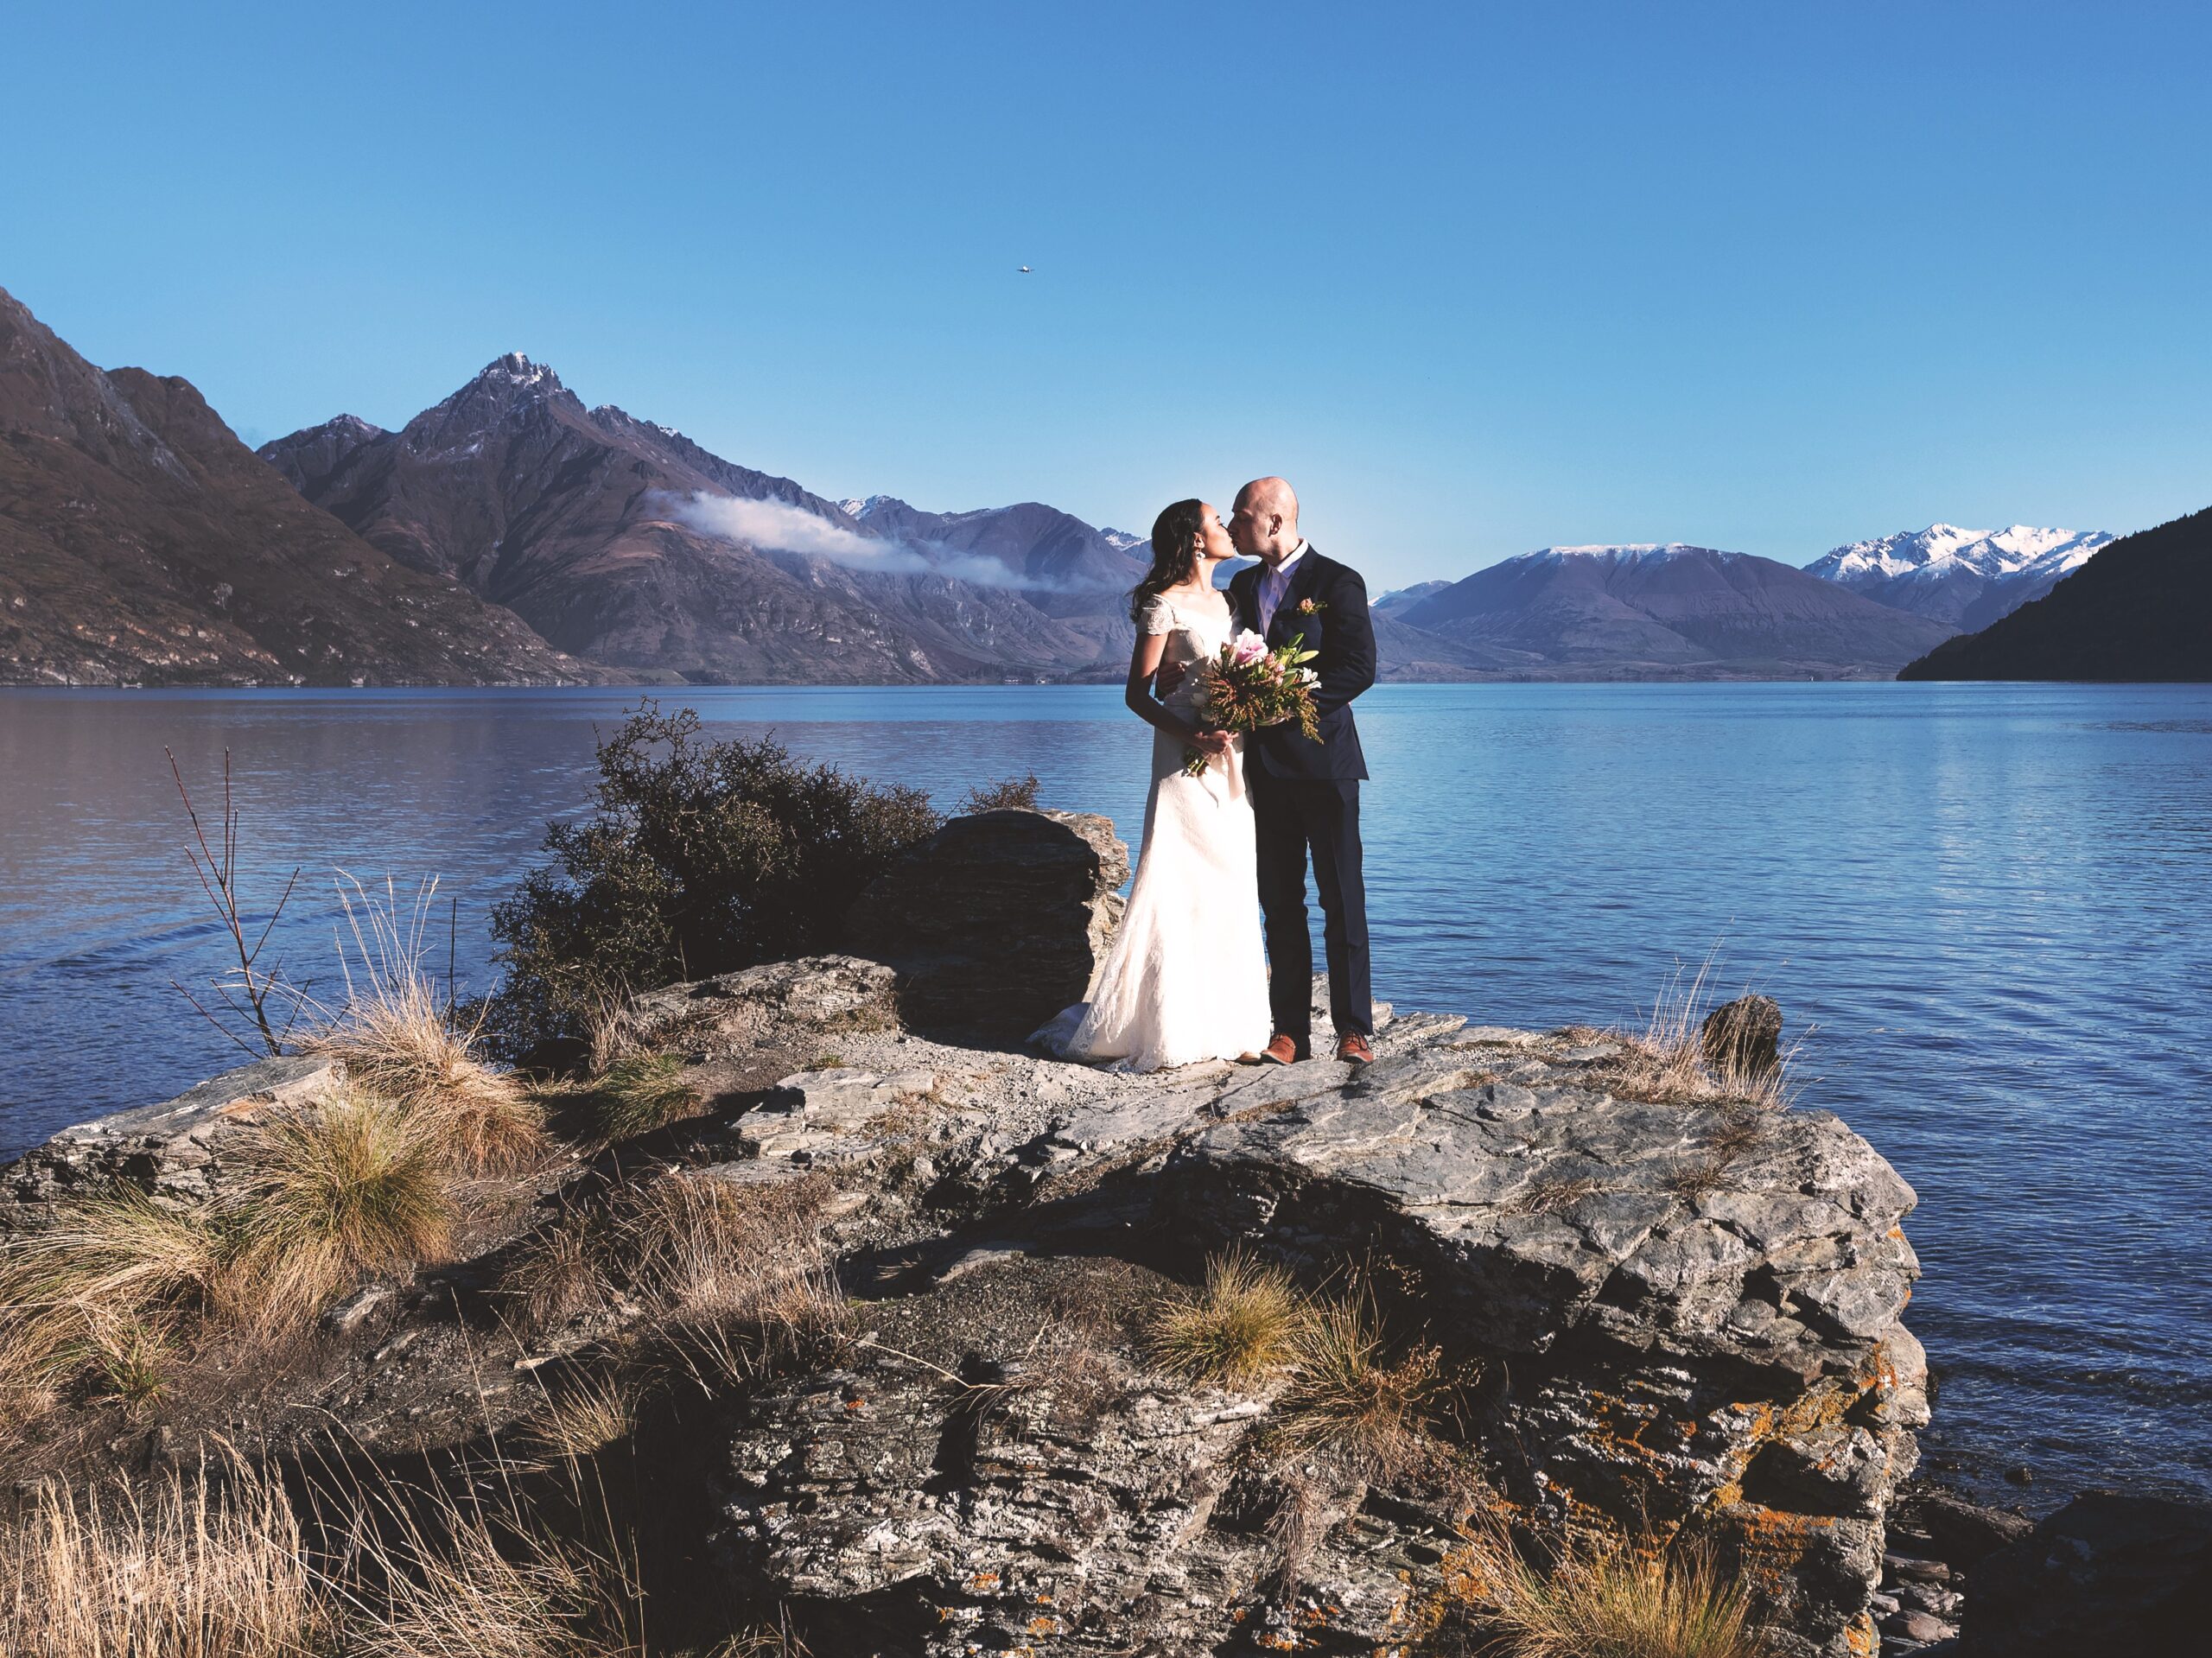 David and Joy just moments after exchanging their vows on the Queenstown lakefront